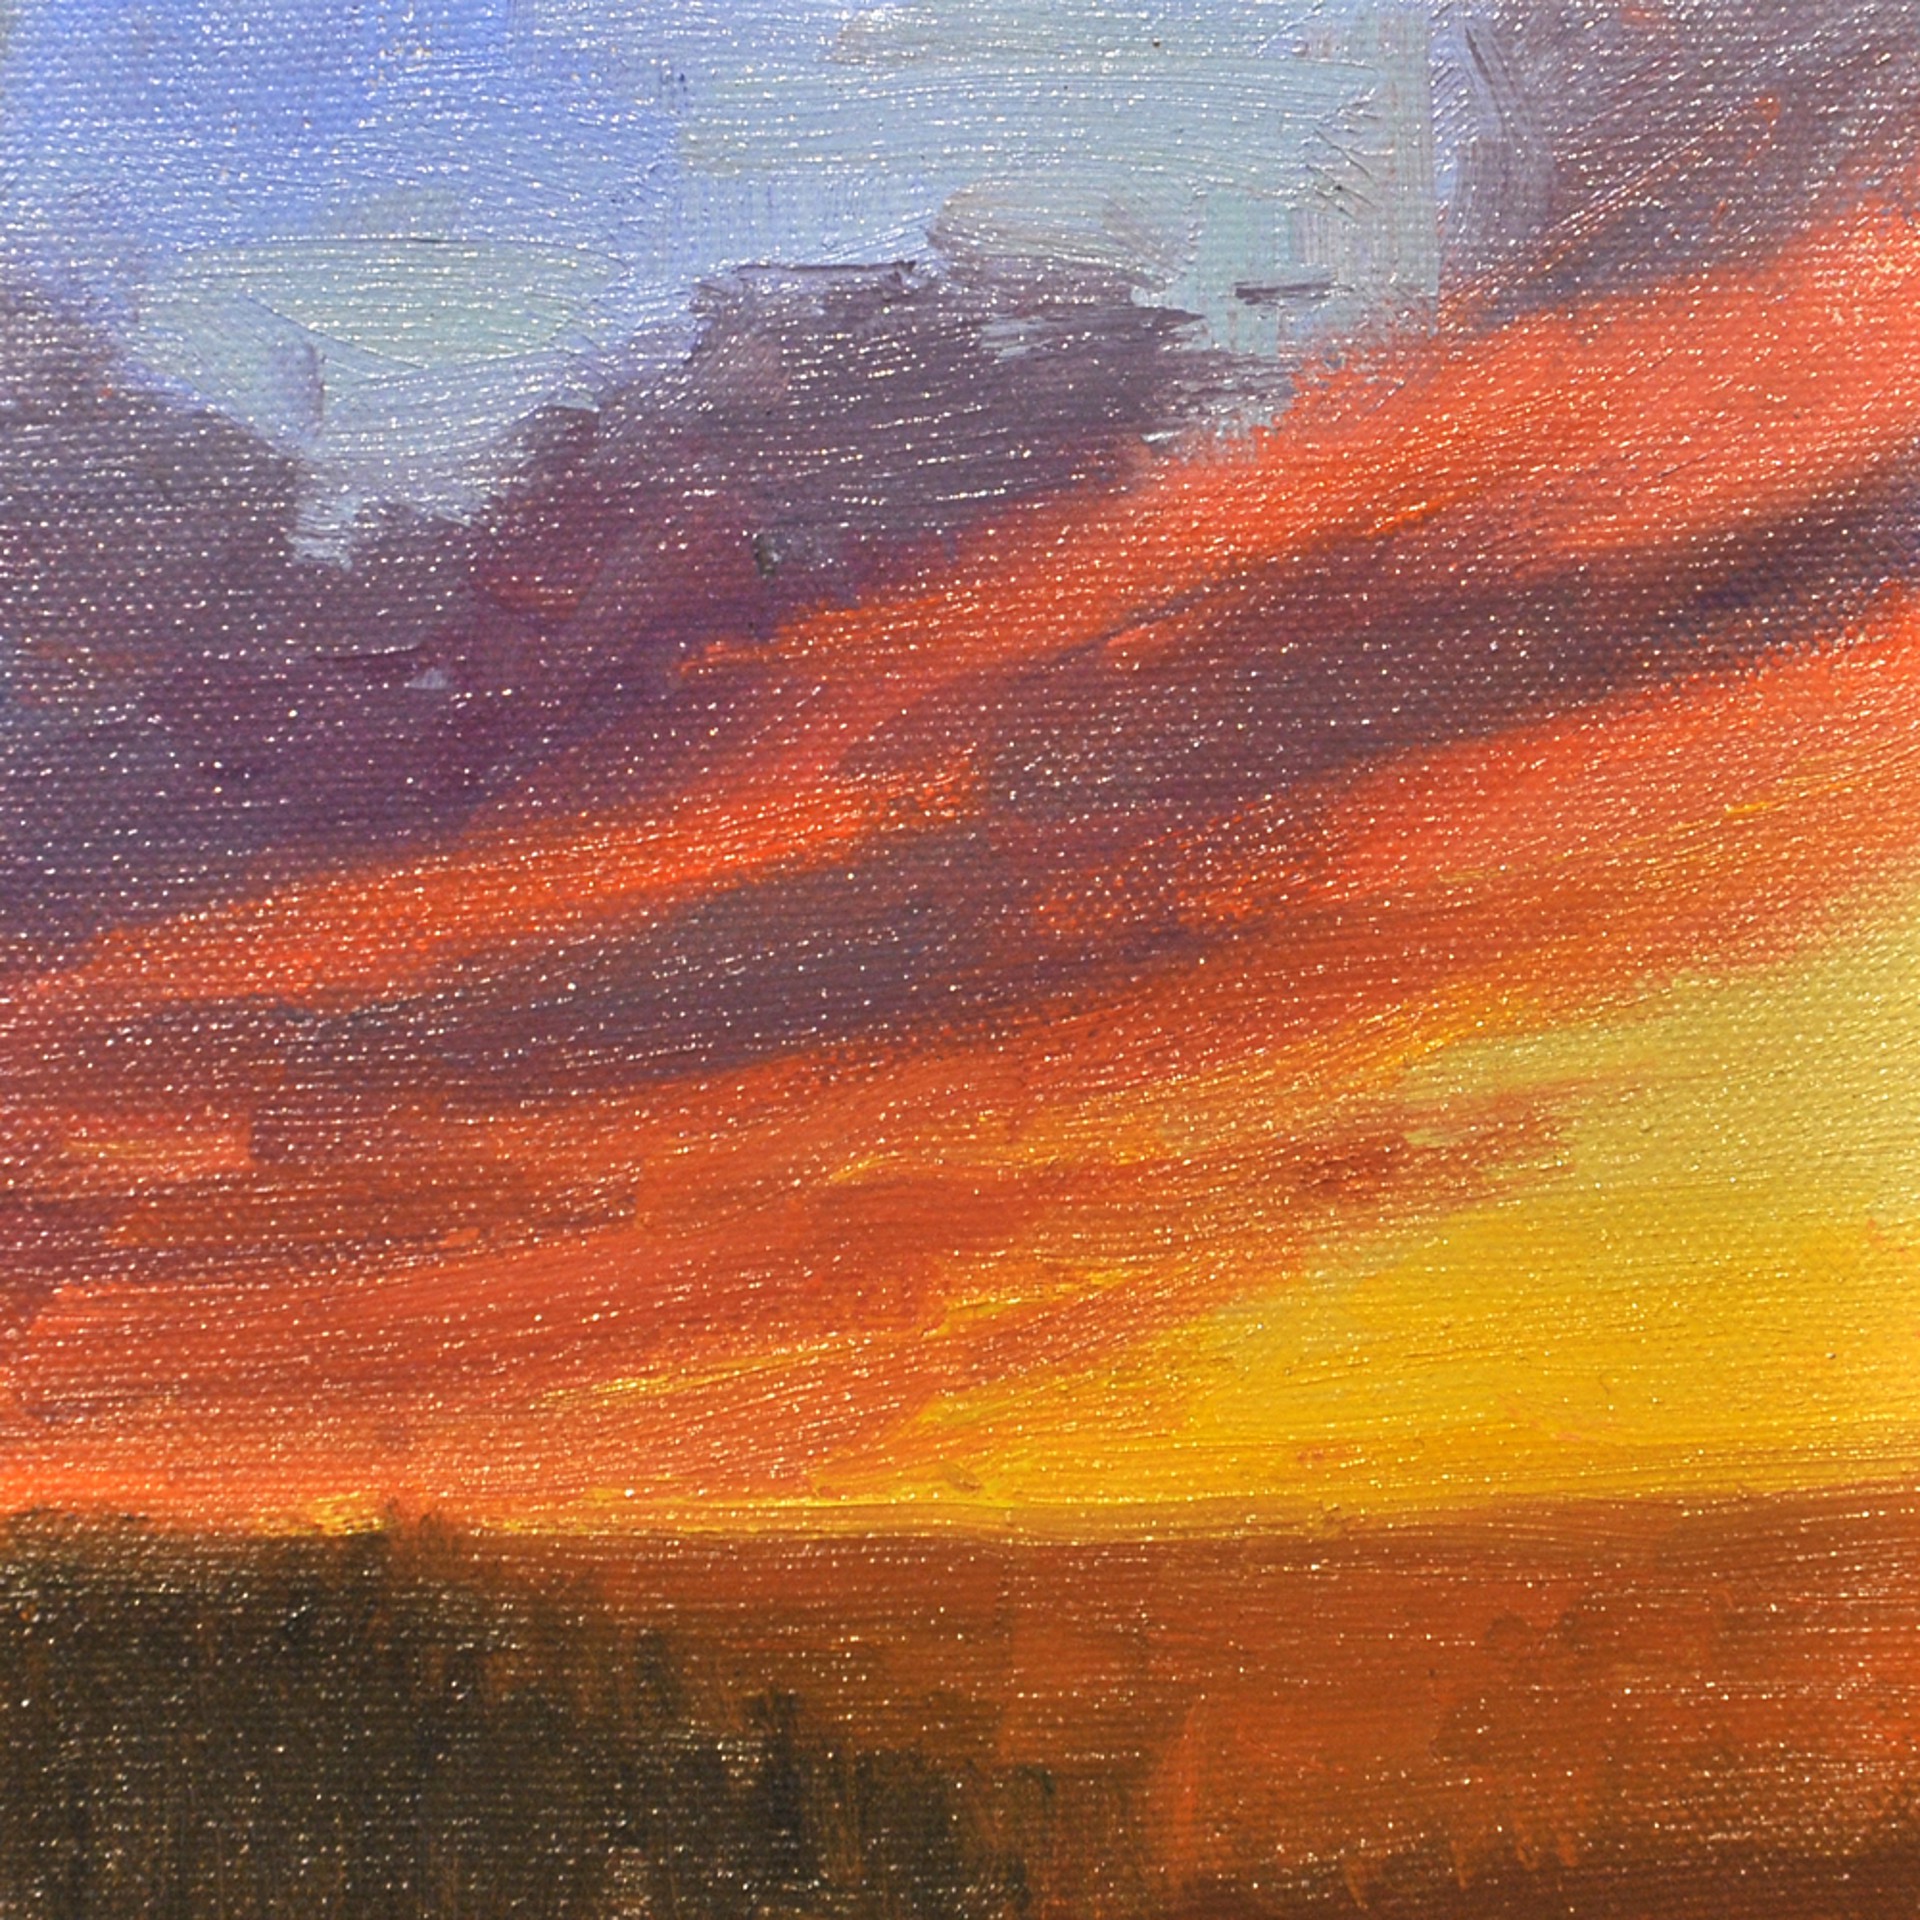 Fire in the Sky by Cristine Sundquist